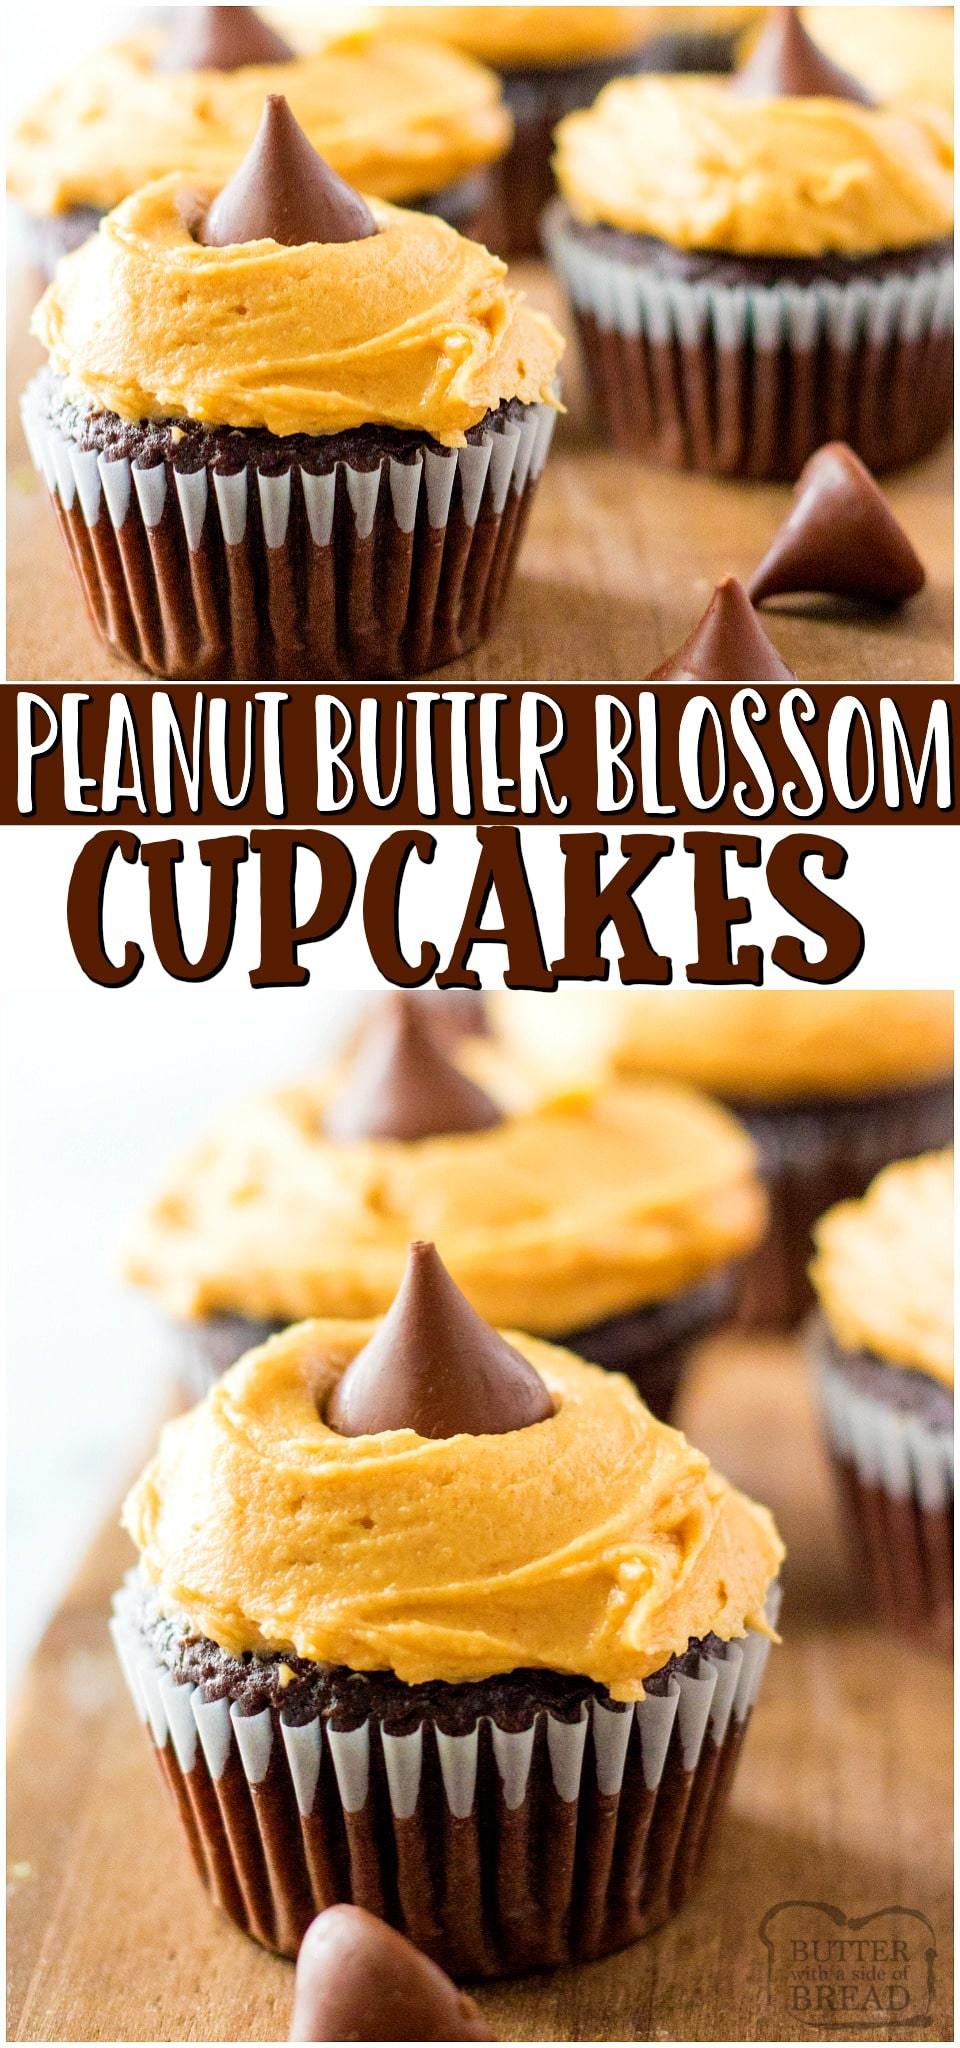 Peanut butter blossom cupcakes~ a fun twist on traditional peanut butter blossom cookies! Chocolate cupcakes topped with Peanut butter cream cheese frosting & a chocolate kiss are a delicious treat! #cupcakes #peanutbutter #dessert #frosting #chocolate #easyrecipe from BUTTER WITH A SIDE OF BREAD